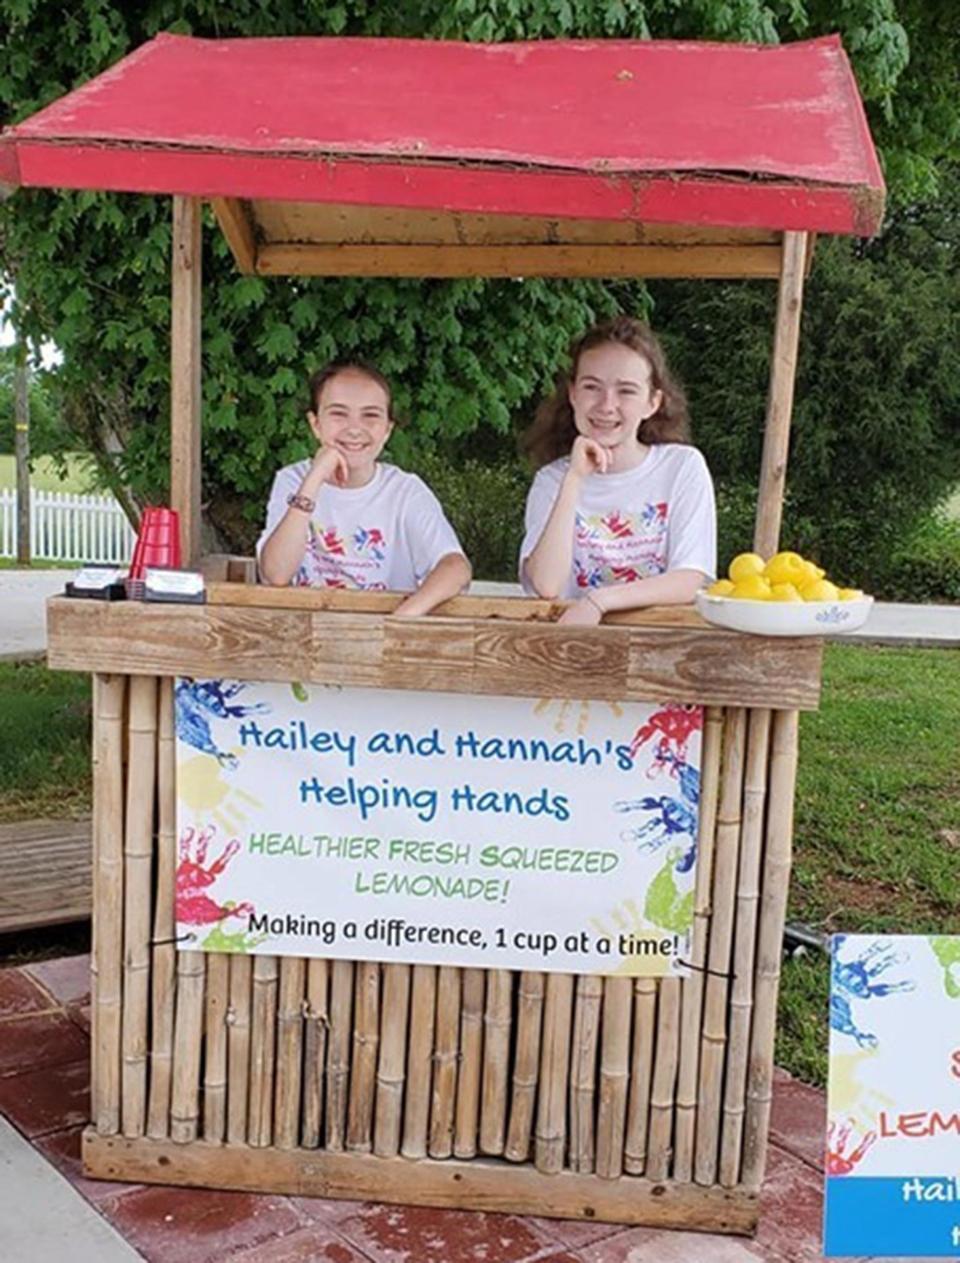 Sisters Pay Off District's Lunch Debt by Selling Lemonade